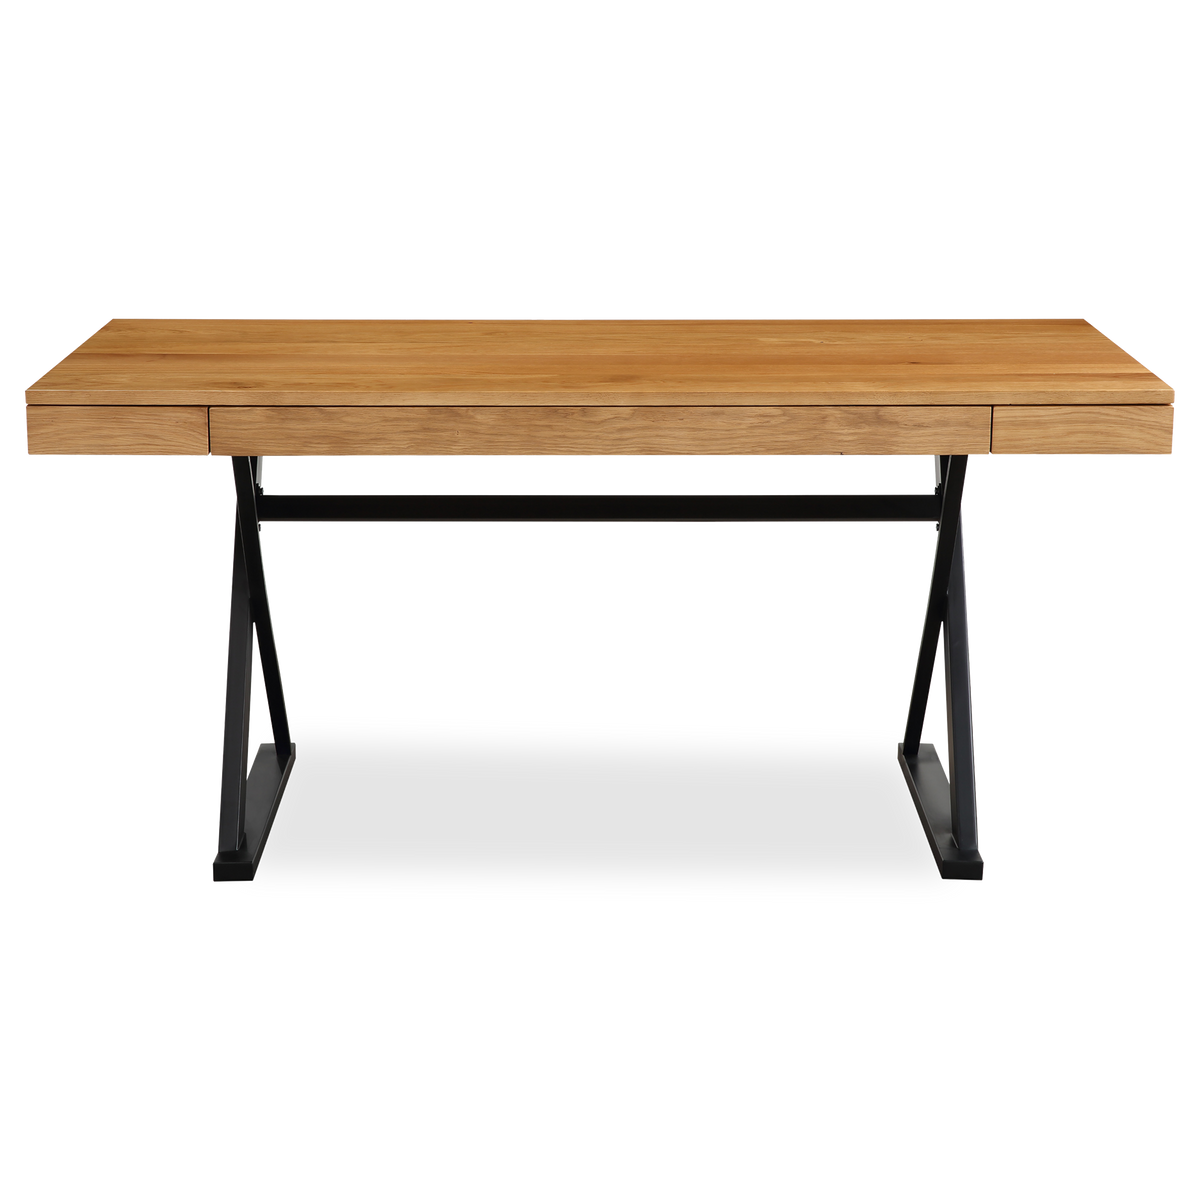 Enriched in modern design, the Palermo desk's solid oak construction and trestle steel frame illustrate the minimalist lifestyle movement with clean lines.